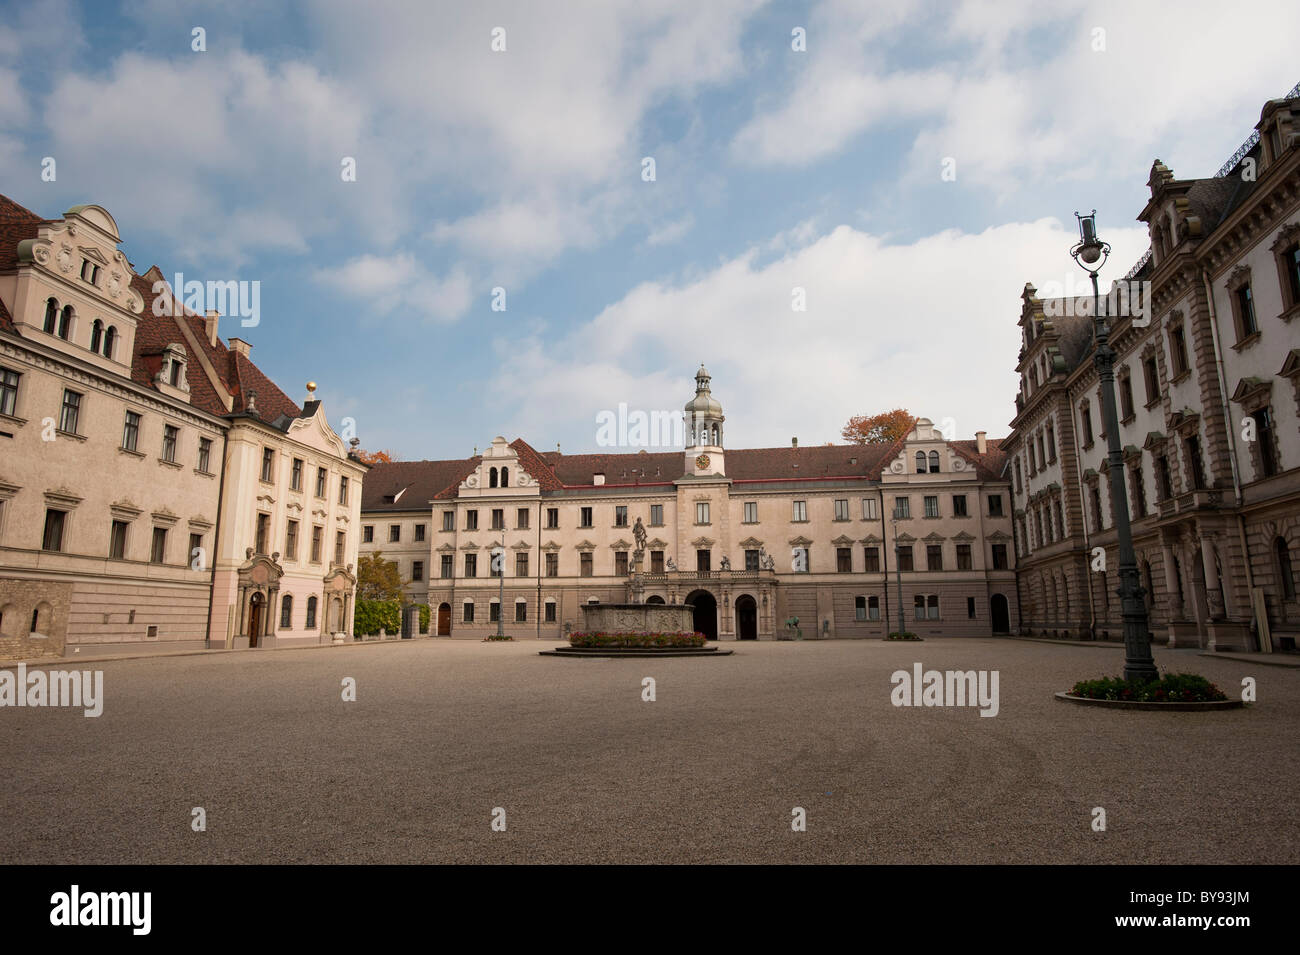 Palace of St. Emmeram, Castle of Thurn and Taxis, Regensburg, Bavaria, Germany, Europe Stock Photo